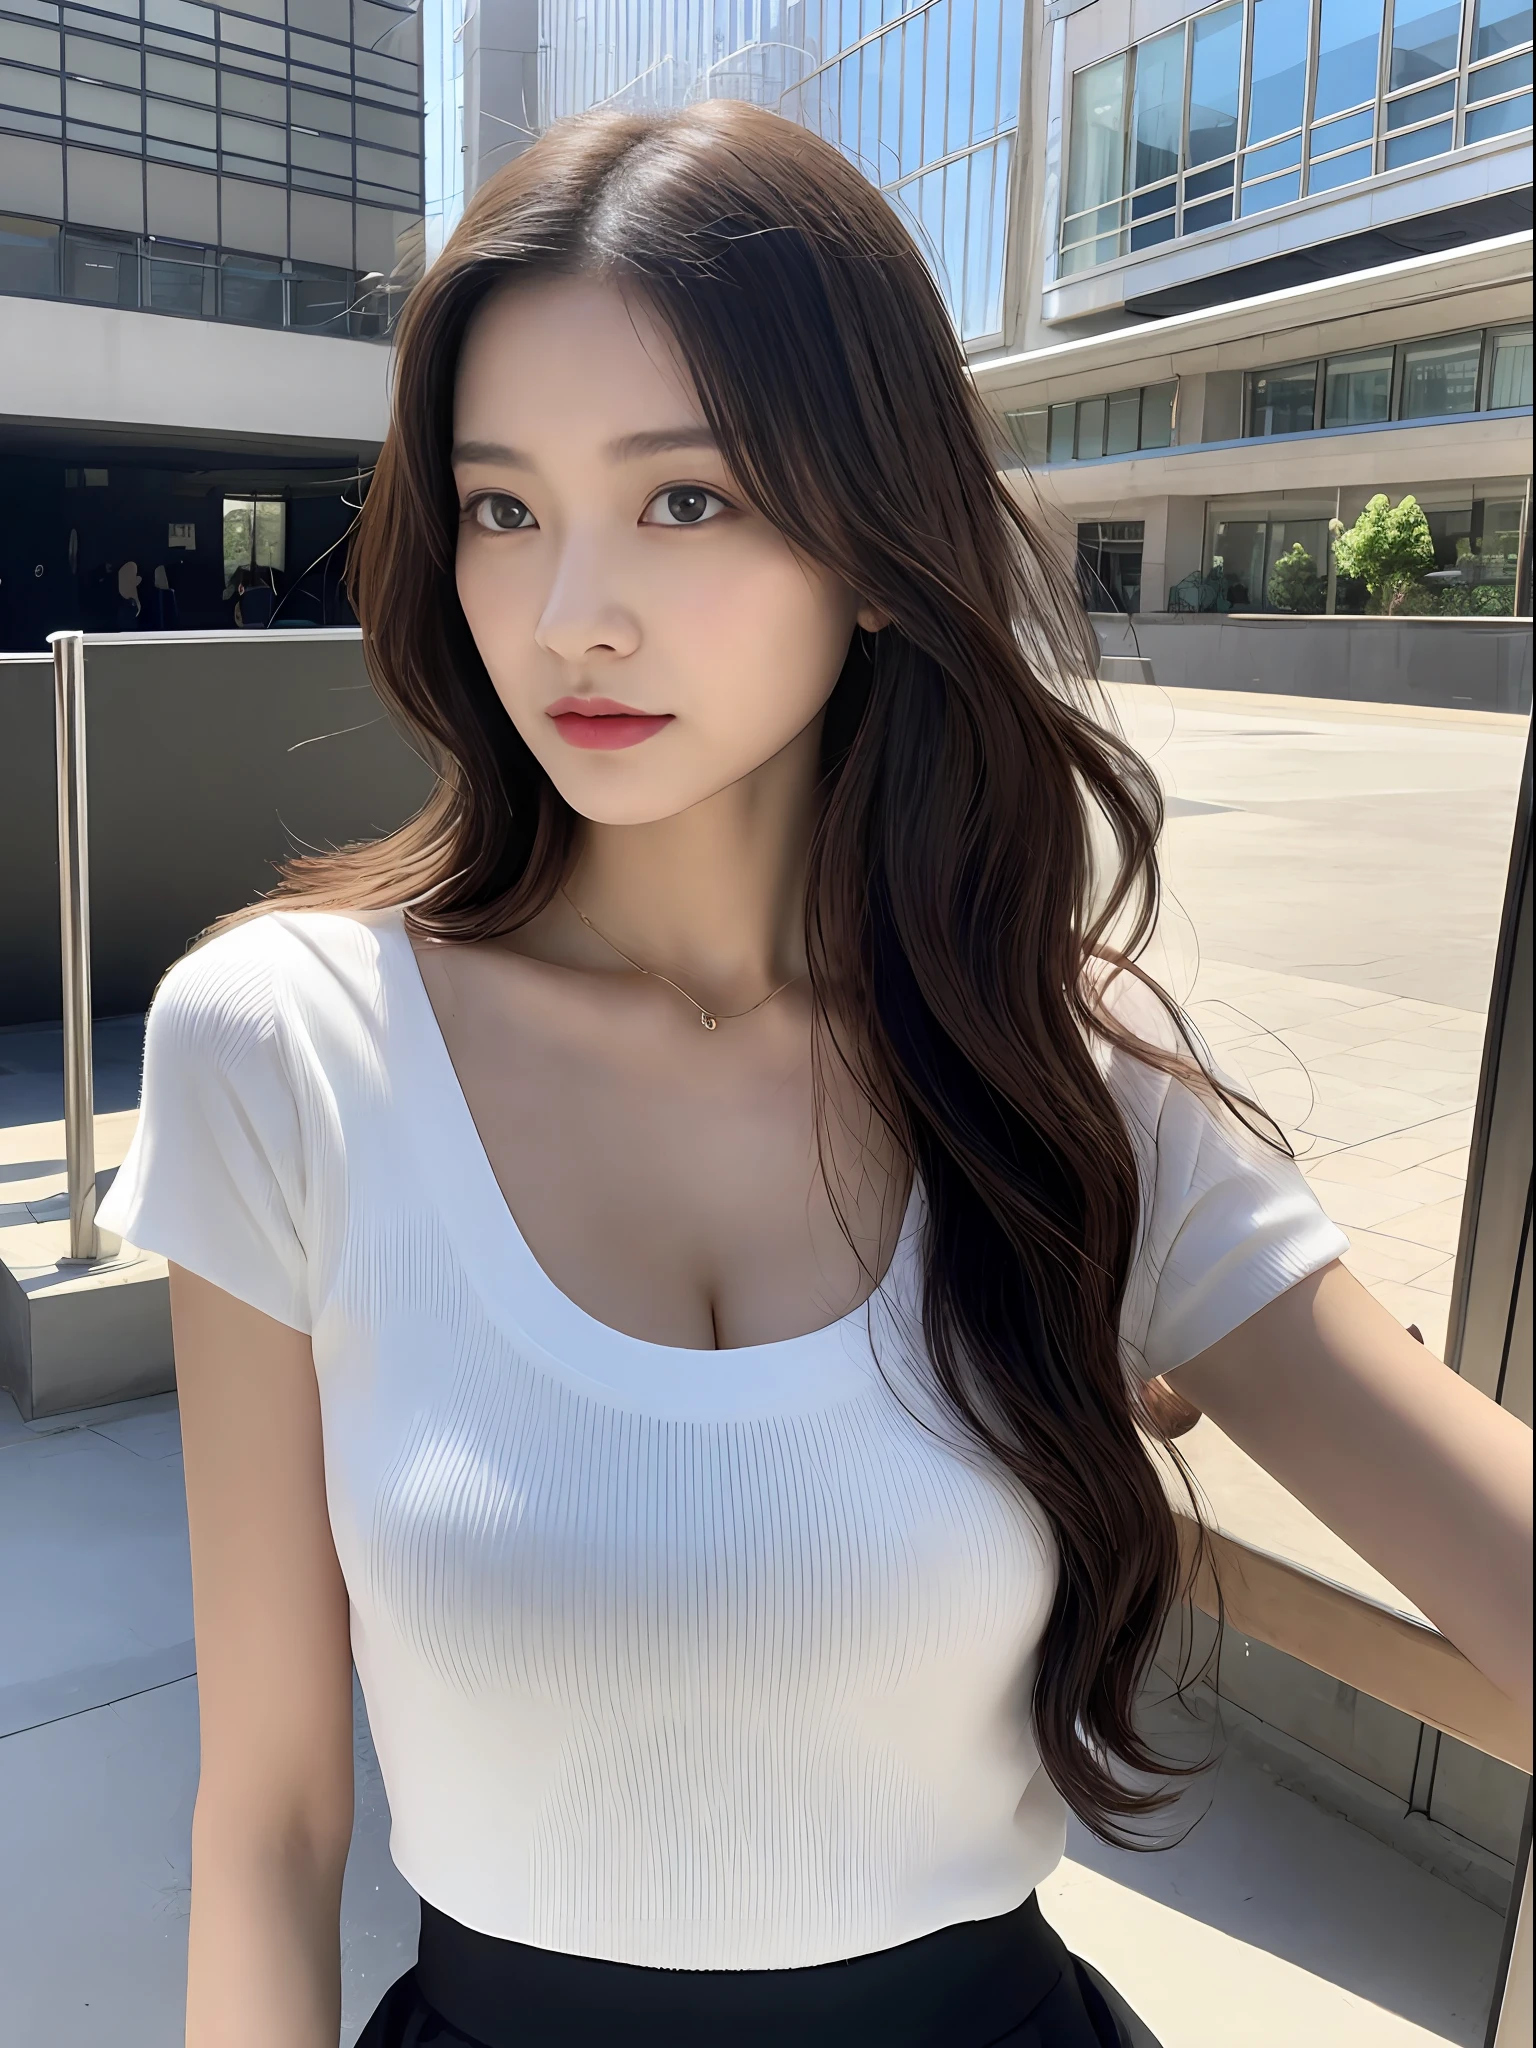 1 girl in, (Best Quality, High resolution, masutepiece :1.3), A tall and pretty woman, Slender Abs, Dark brown hair styled in loose waves, Large breasts, no-good, cleavage of the breast, wearing pendant, White T-shirt, Belt bag, Black skirt, (Modern architecture in background), Details exquisitely rendered in the face and skin texture, Detailed eyes, double eyelid